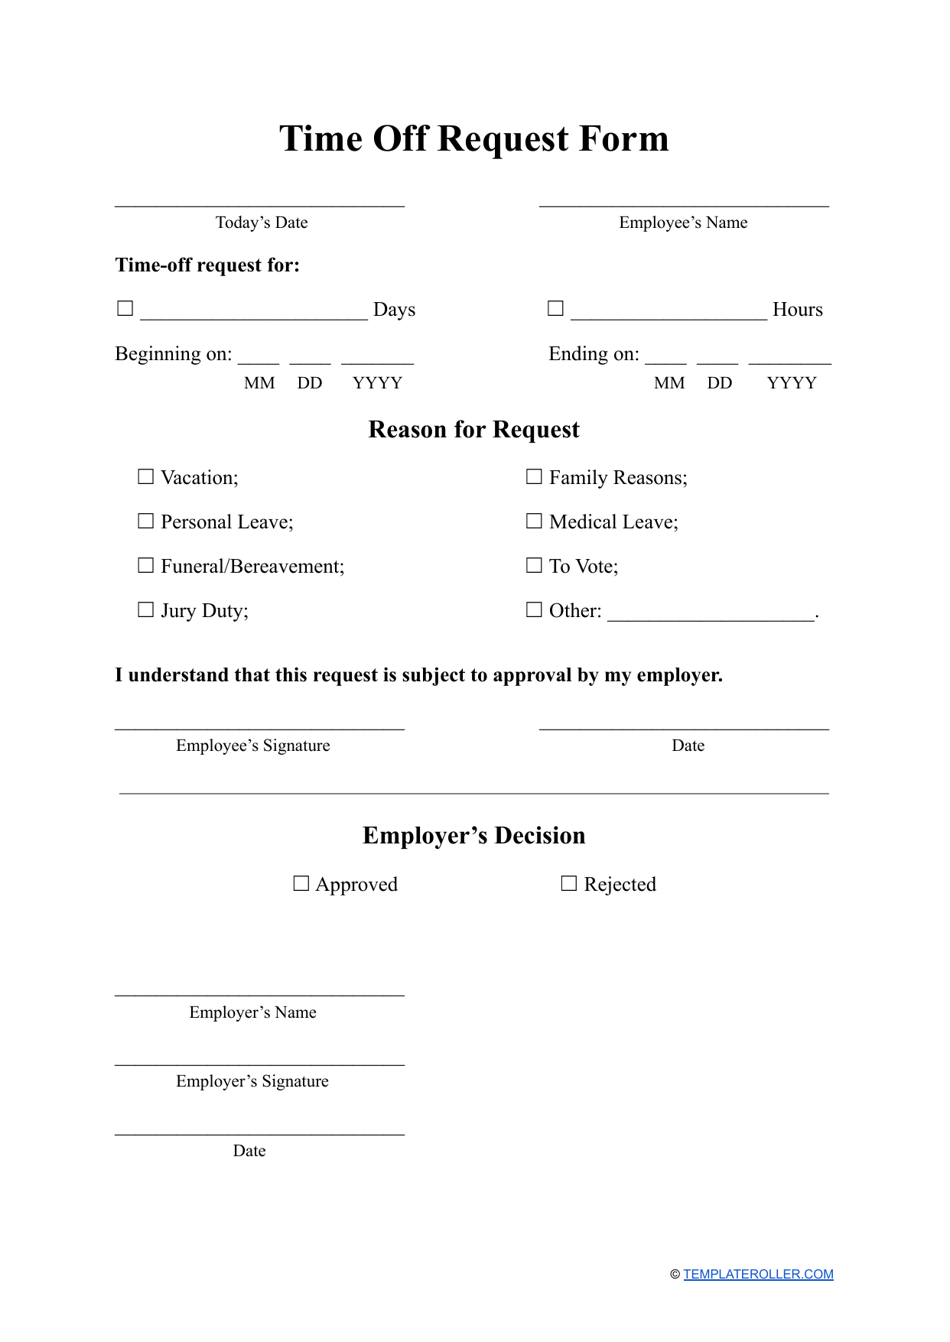 time-off-request-form-template-printable